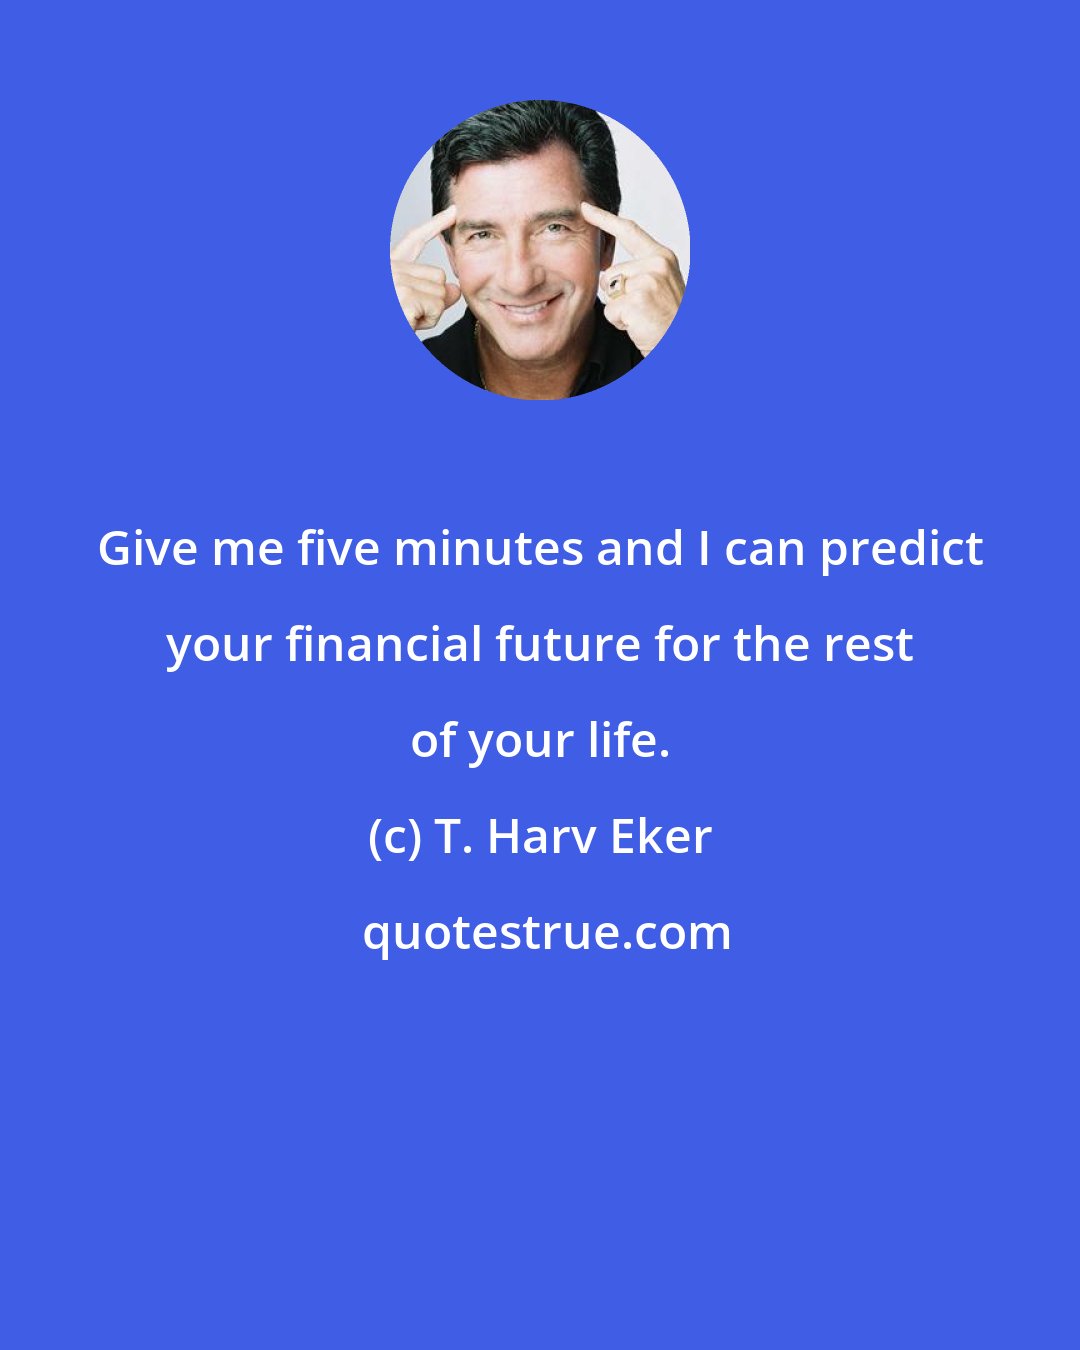 T. Harv Eker: Give me five minutes and I can predict your financial future for the rest of your life.